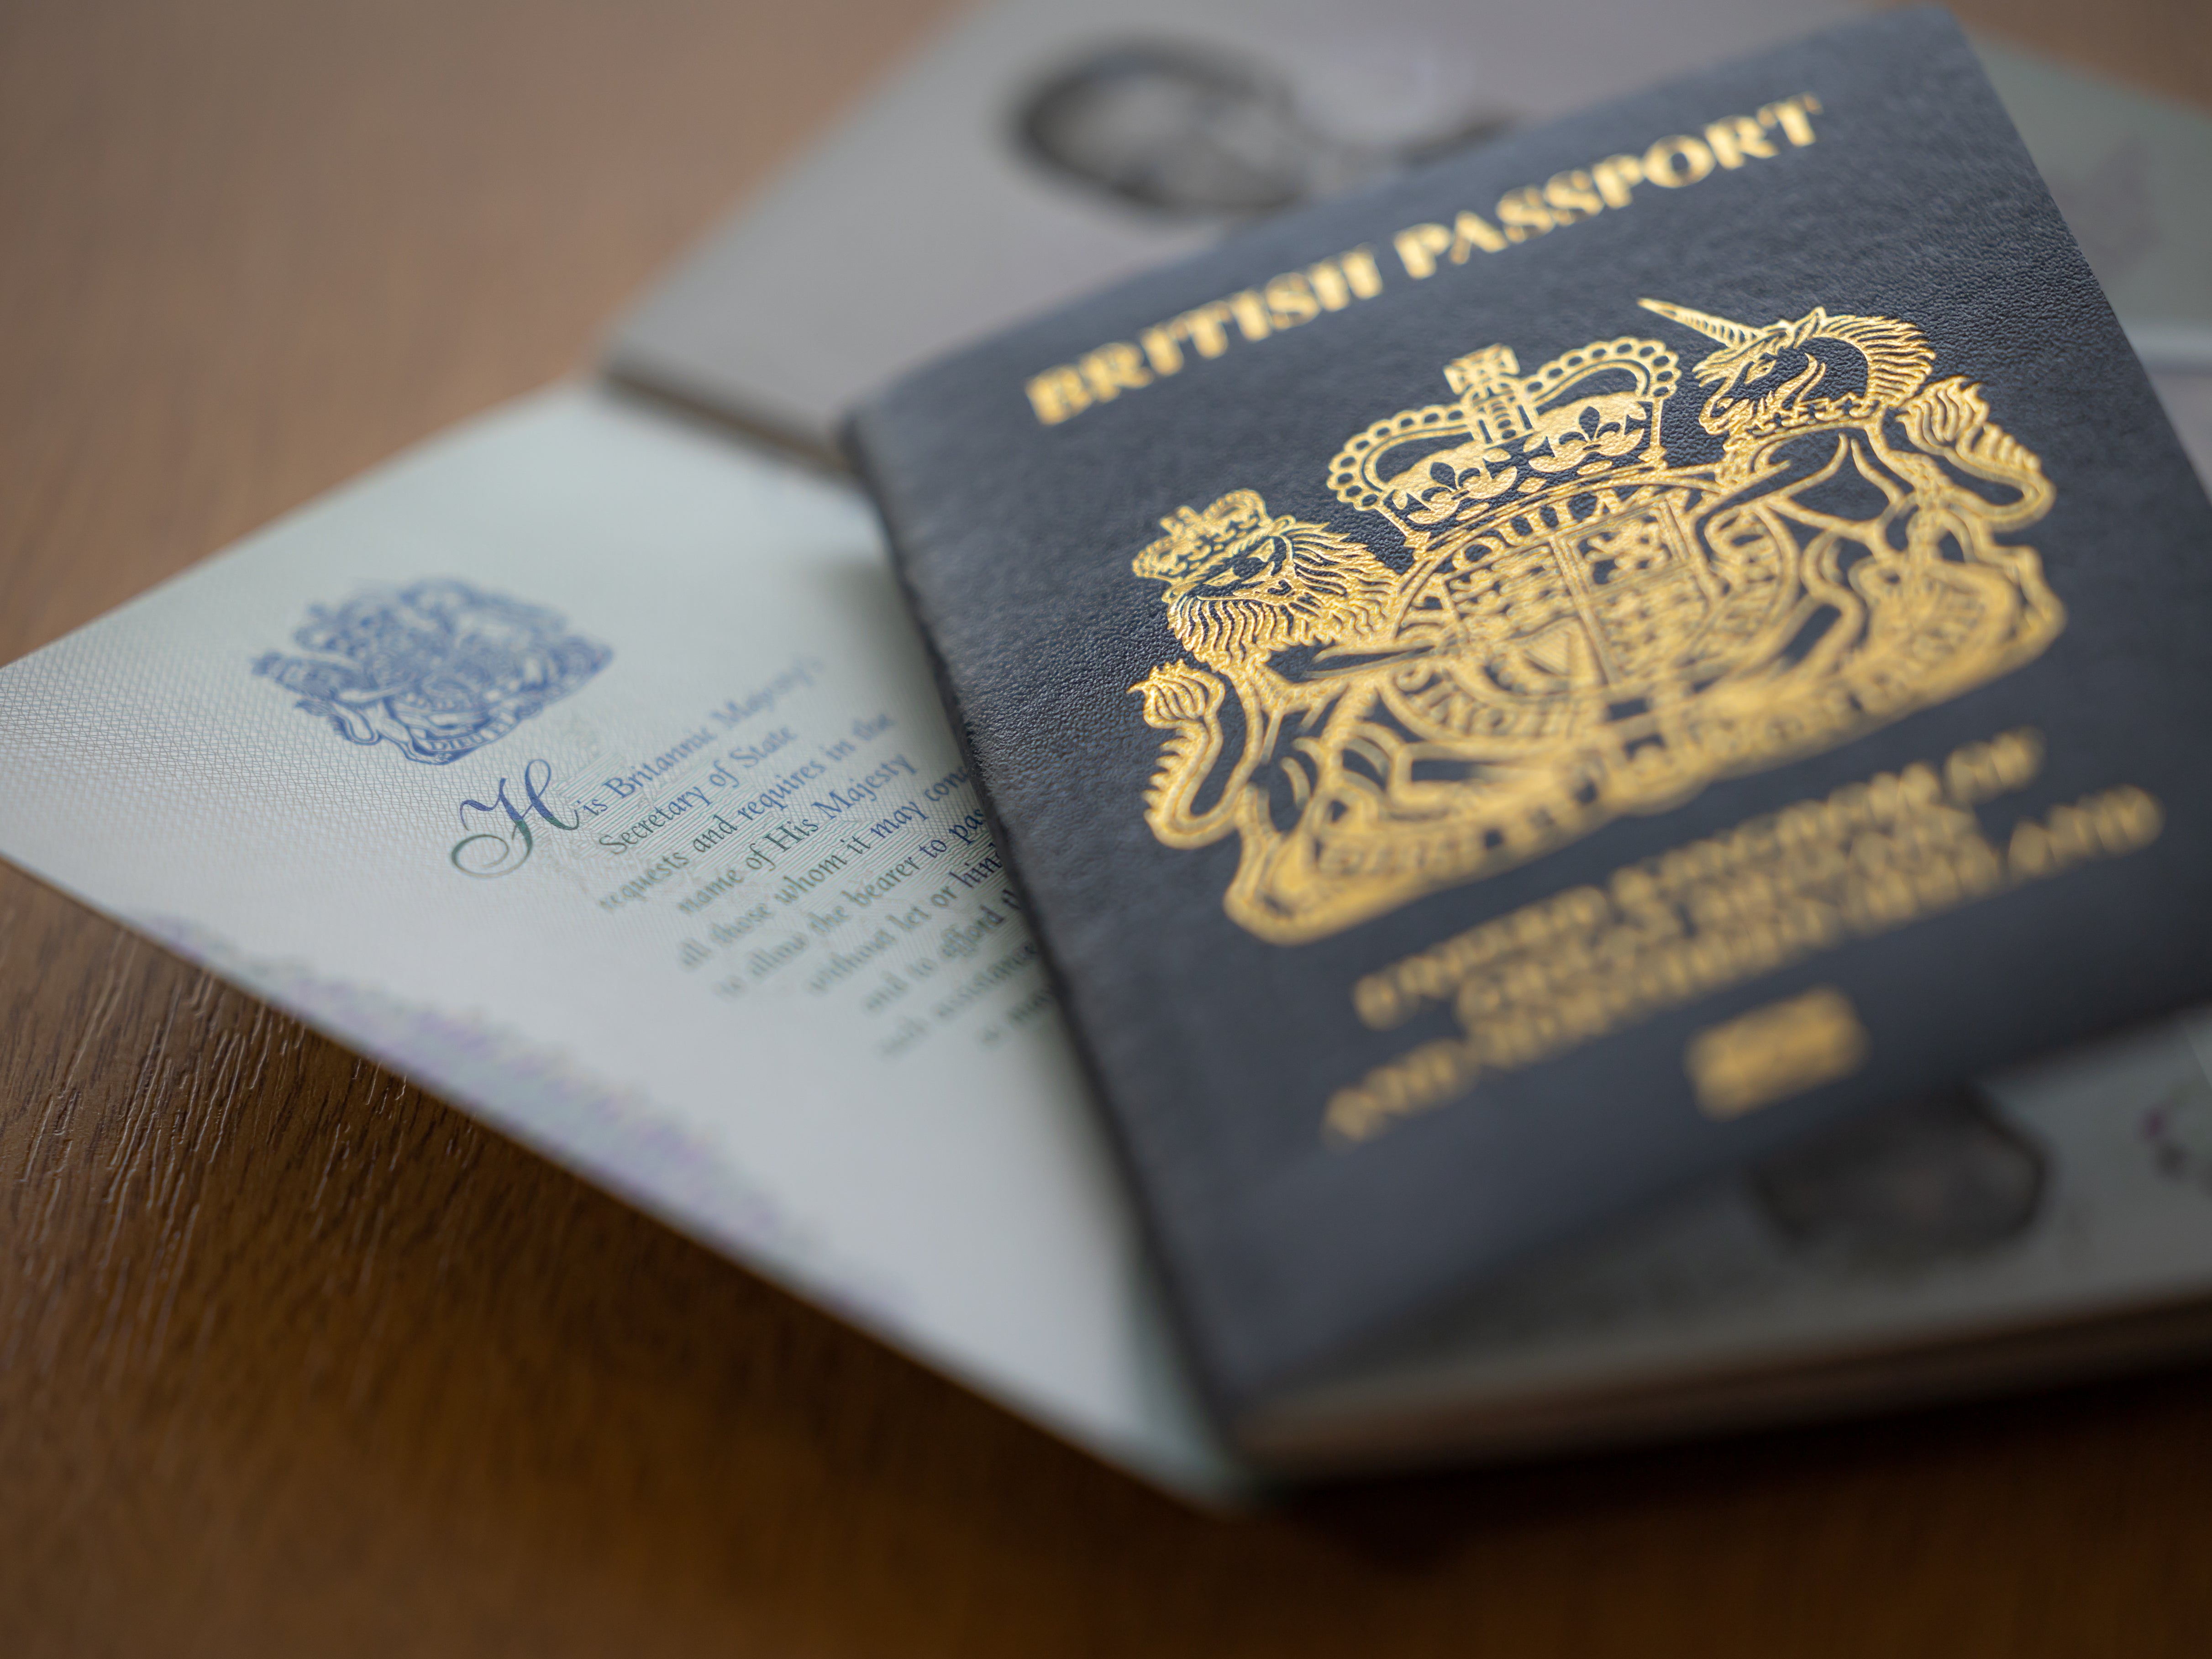 The new UK passport refers to His Majesty